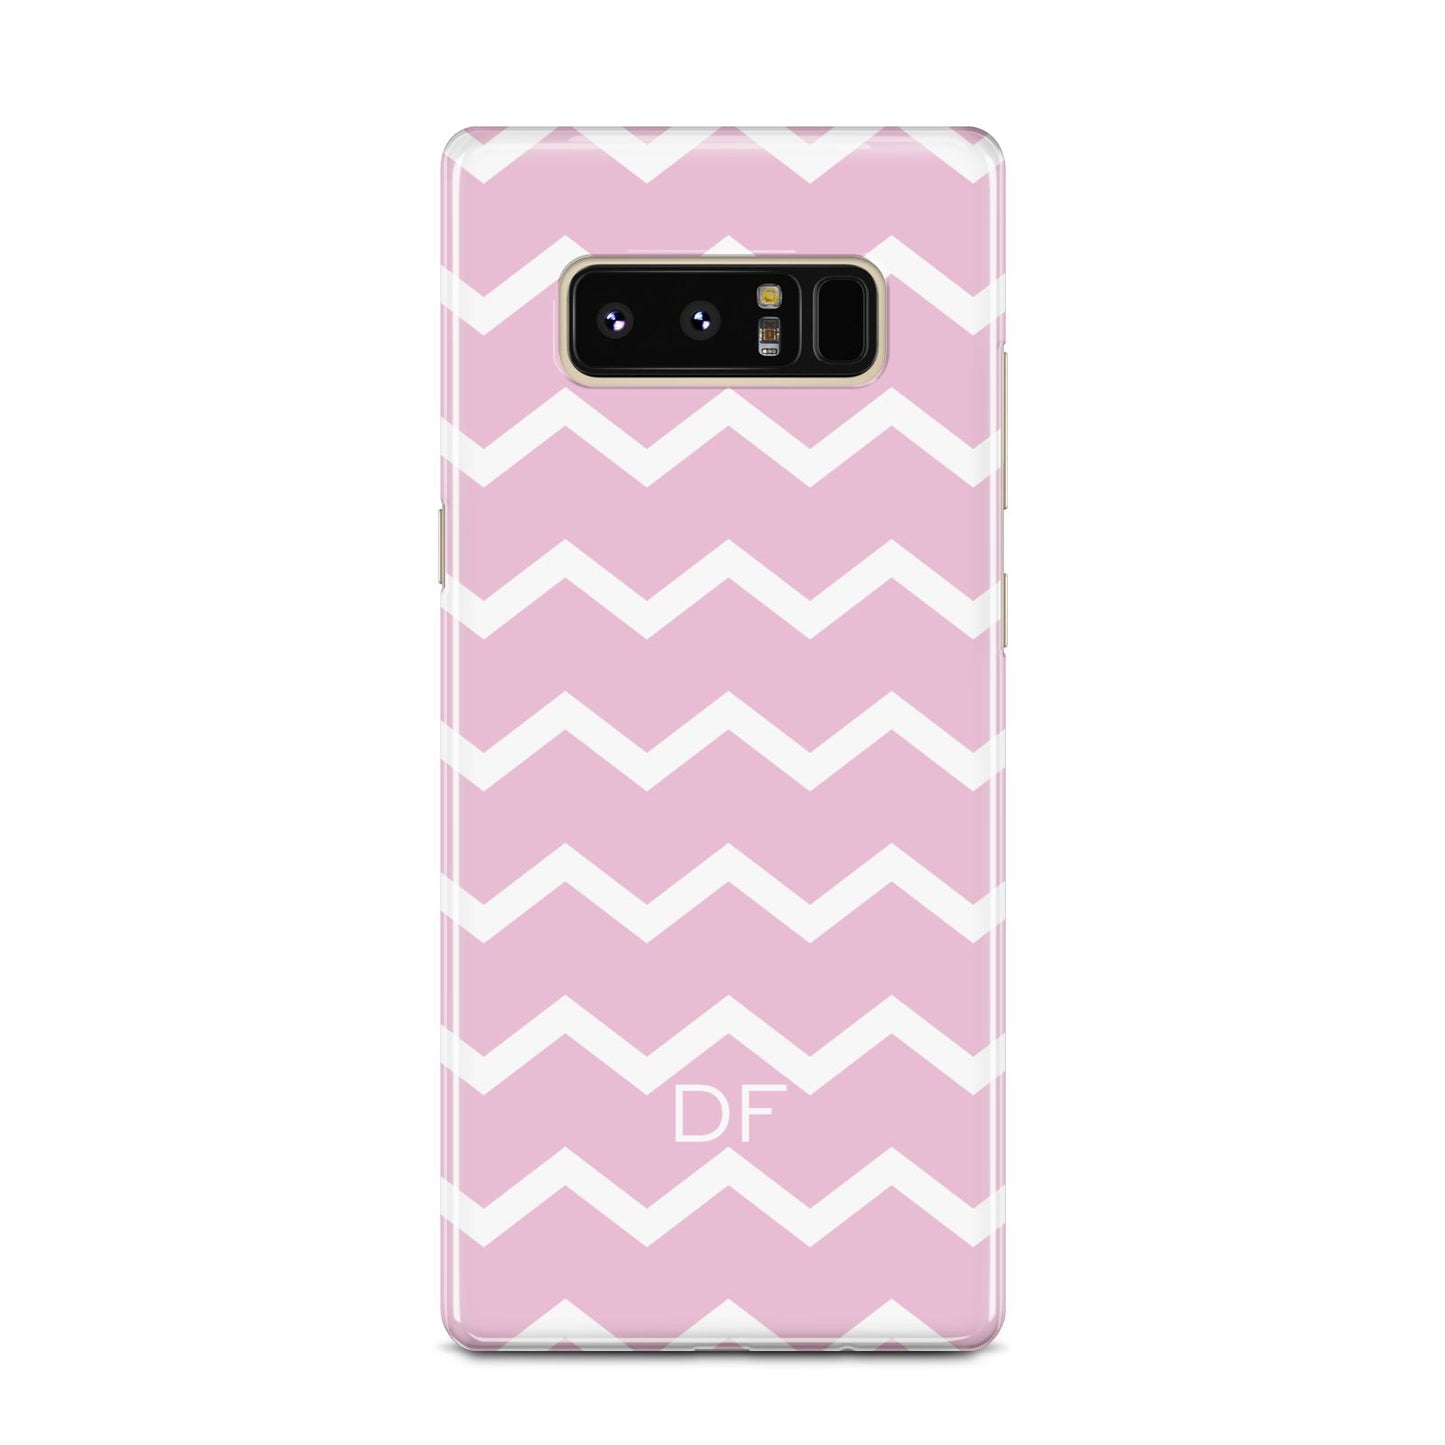 Personalised Chevron Pink Samsung Galaxy Note 8 Case